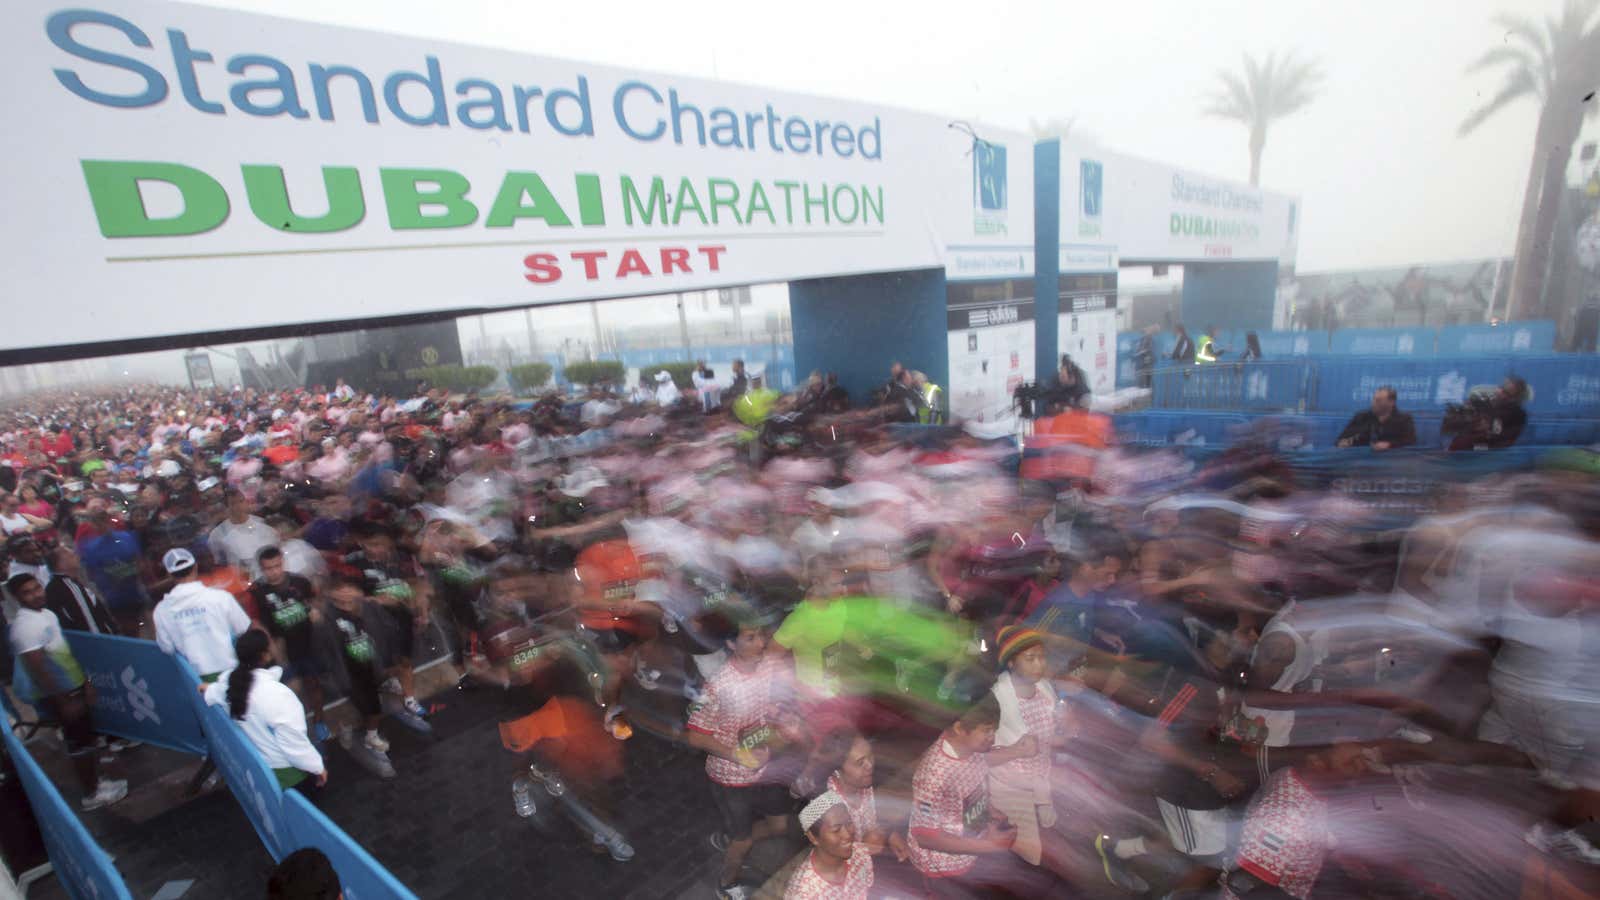 Standard Chartered is winning the race, as all its competitors drop out.